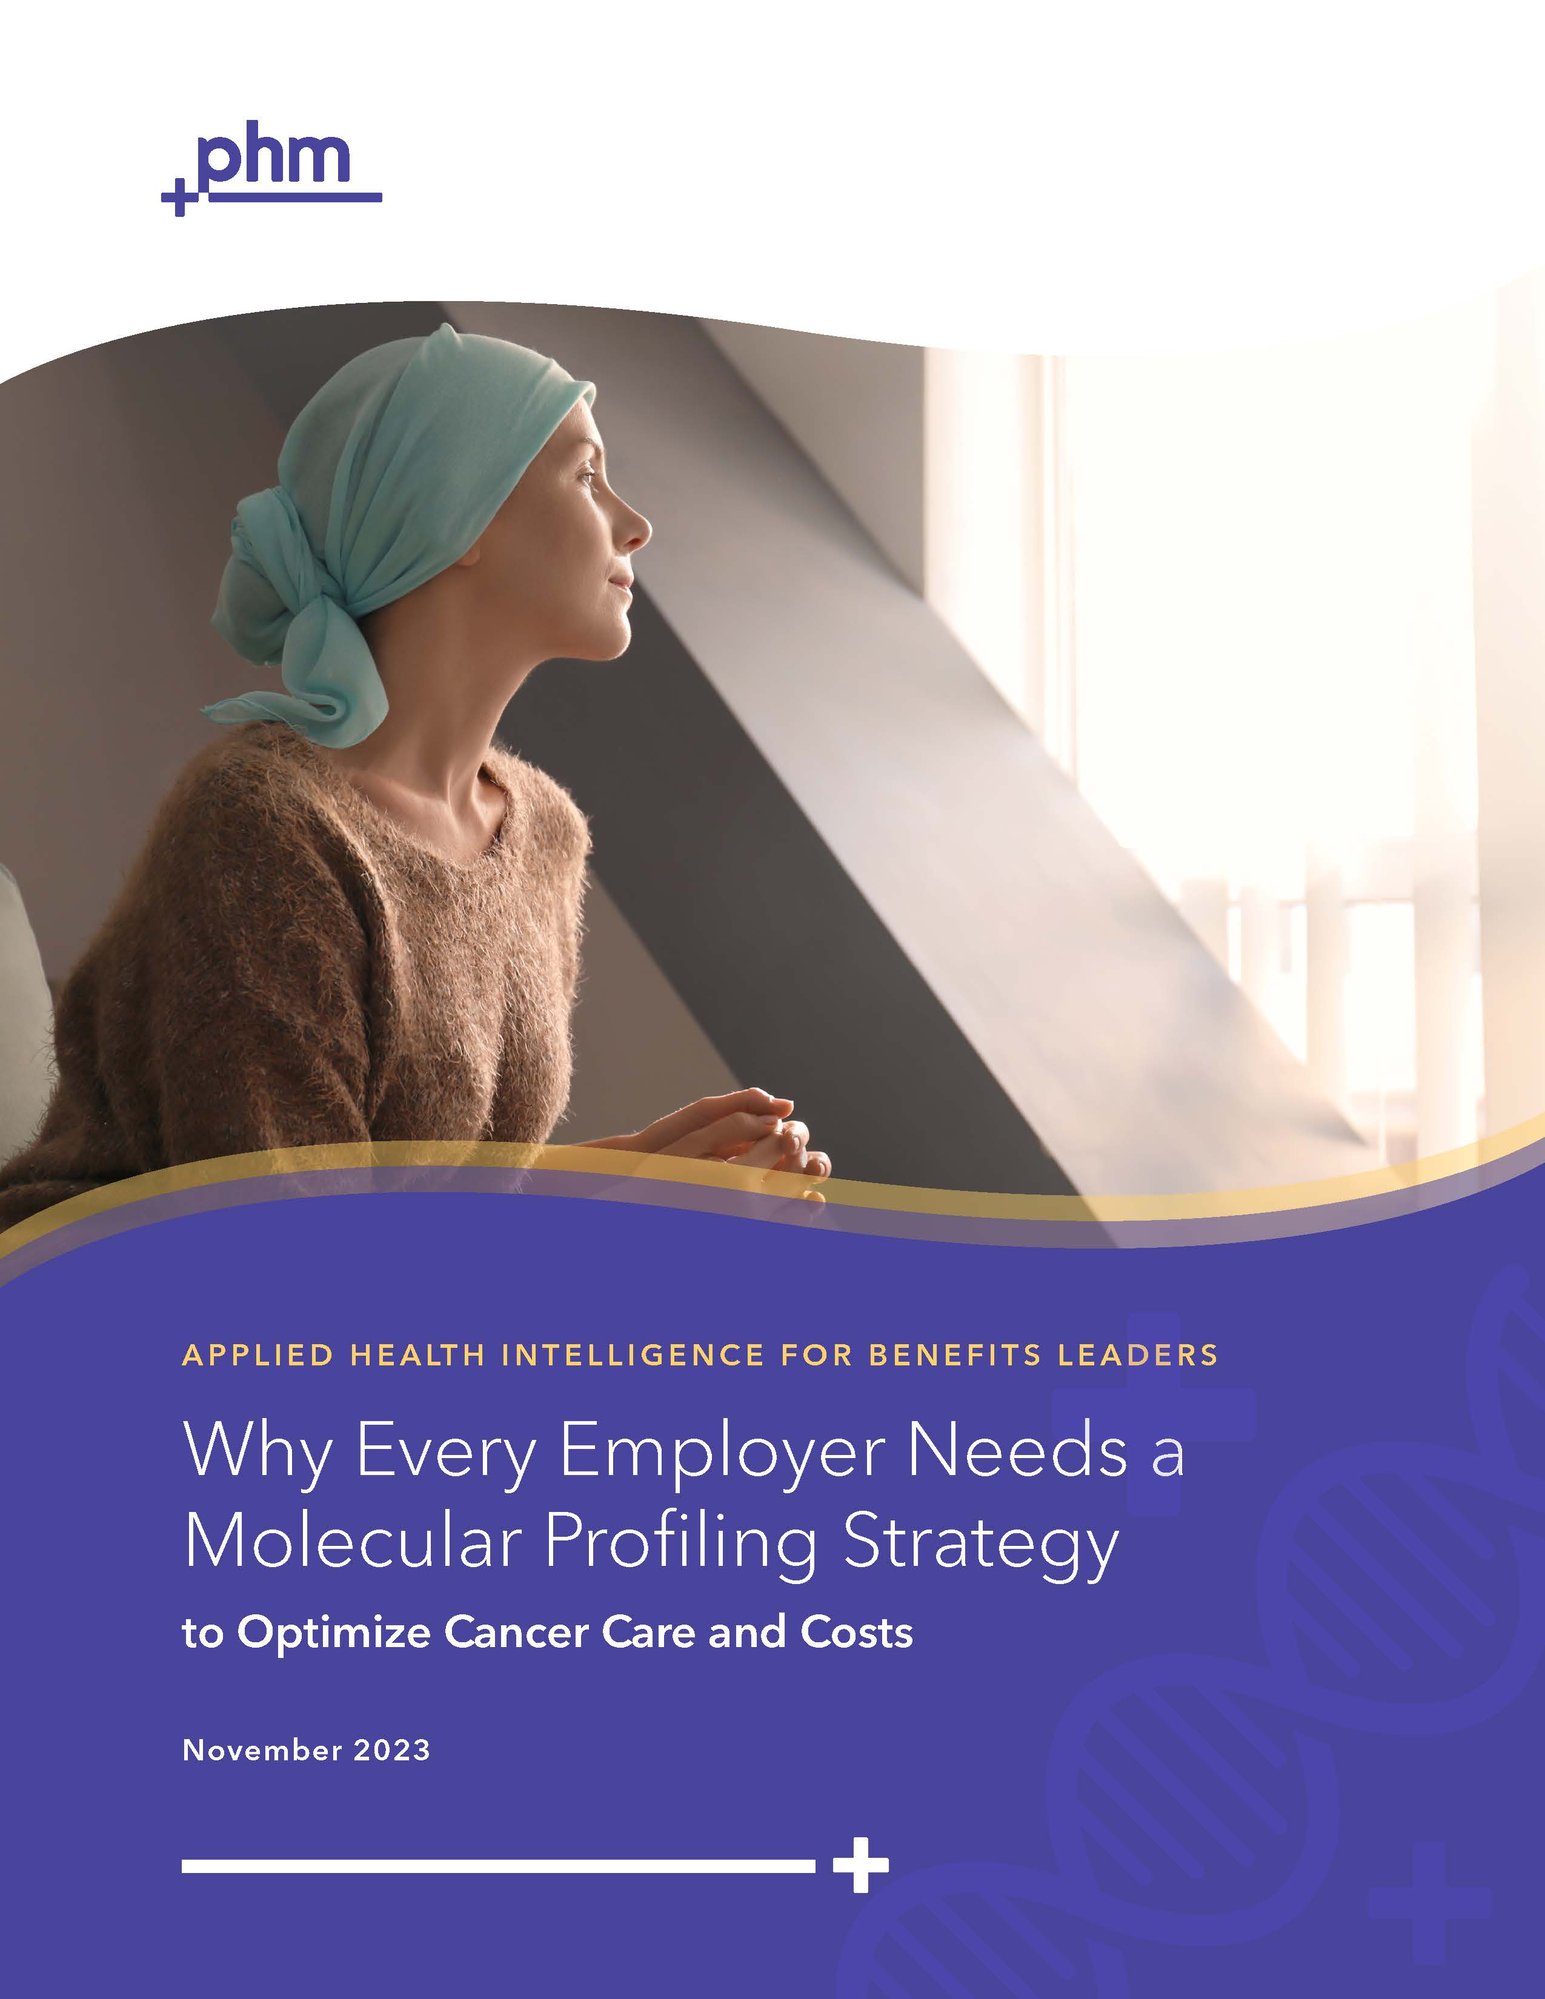 Why Every Employer Needs a Molecular Profiling Strategy (002)_Page_01